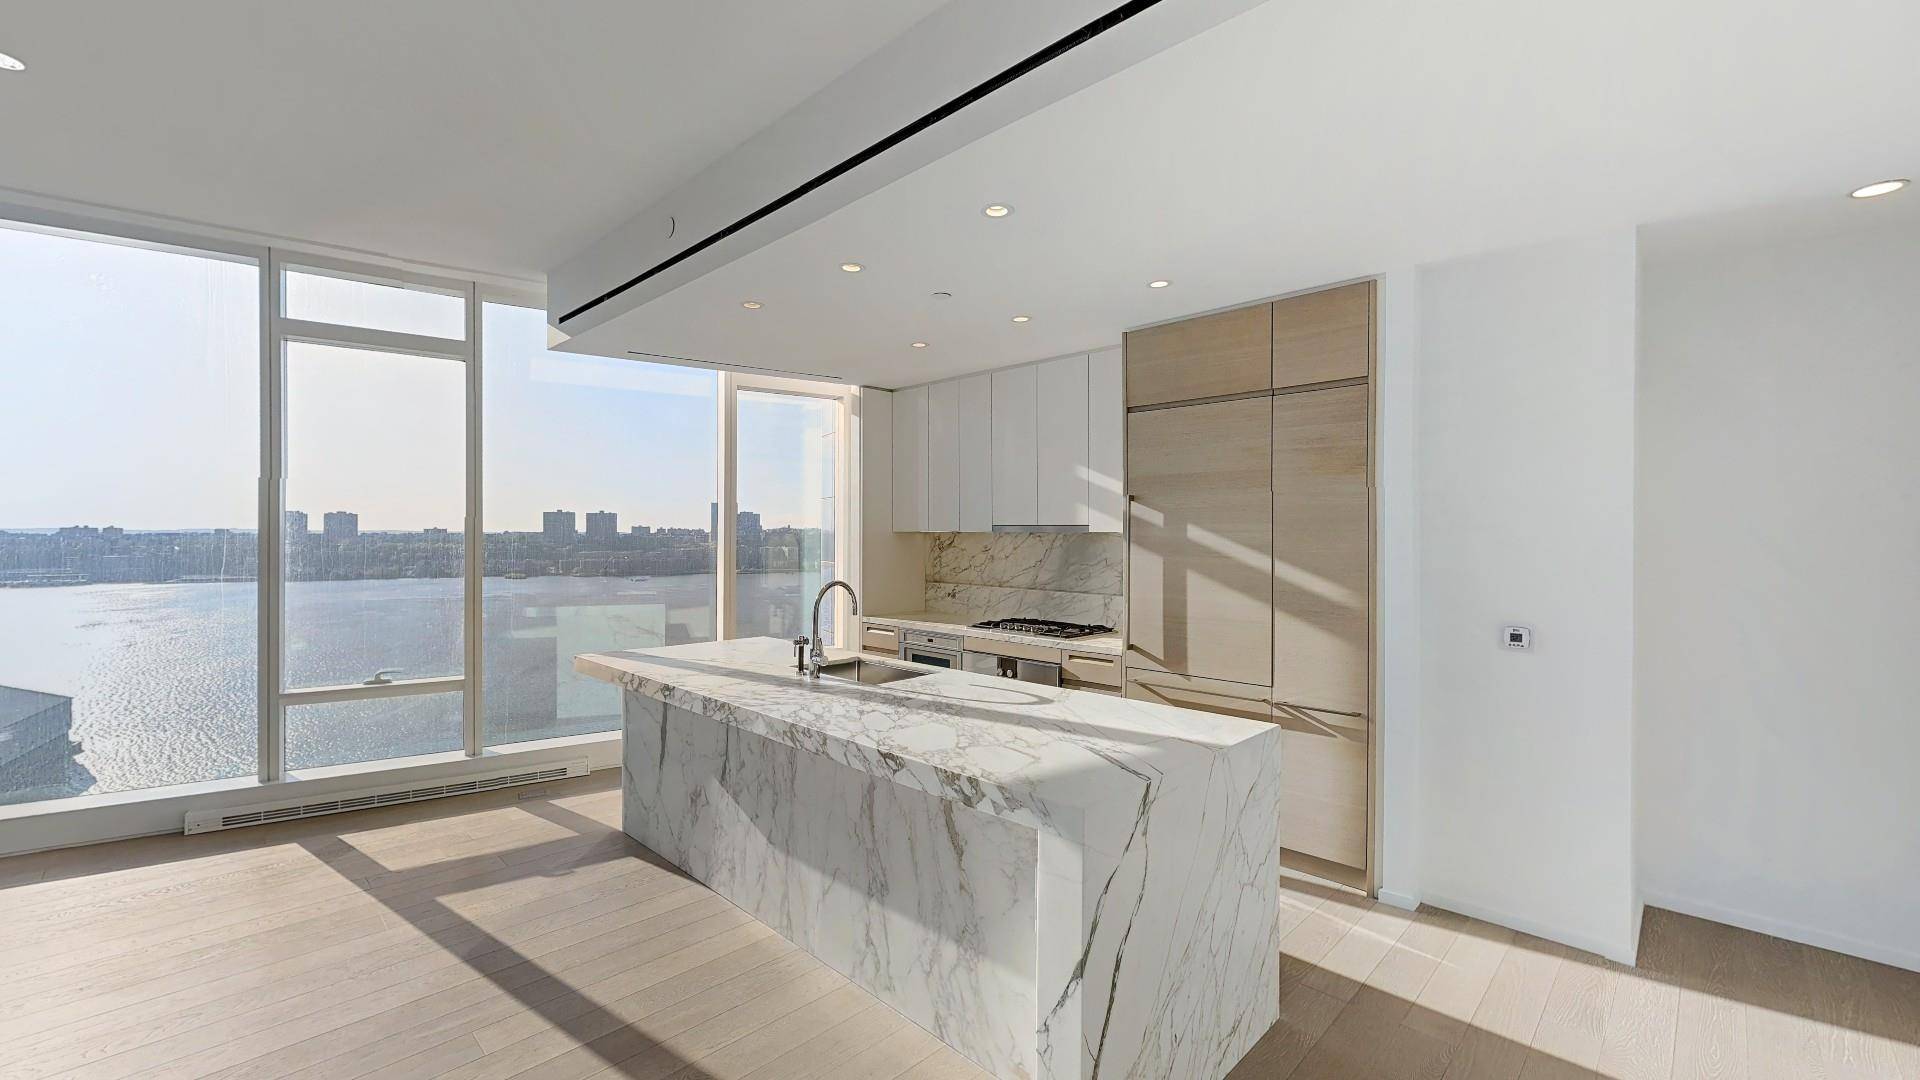 In accordance with the mandate of the State of New York, Douglas Elliman will only be doing virtual showings Views of the Hudson River and abundant natural light to the ...